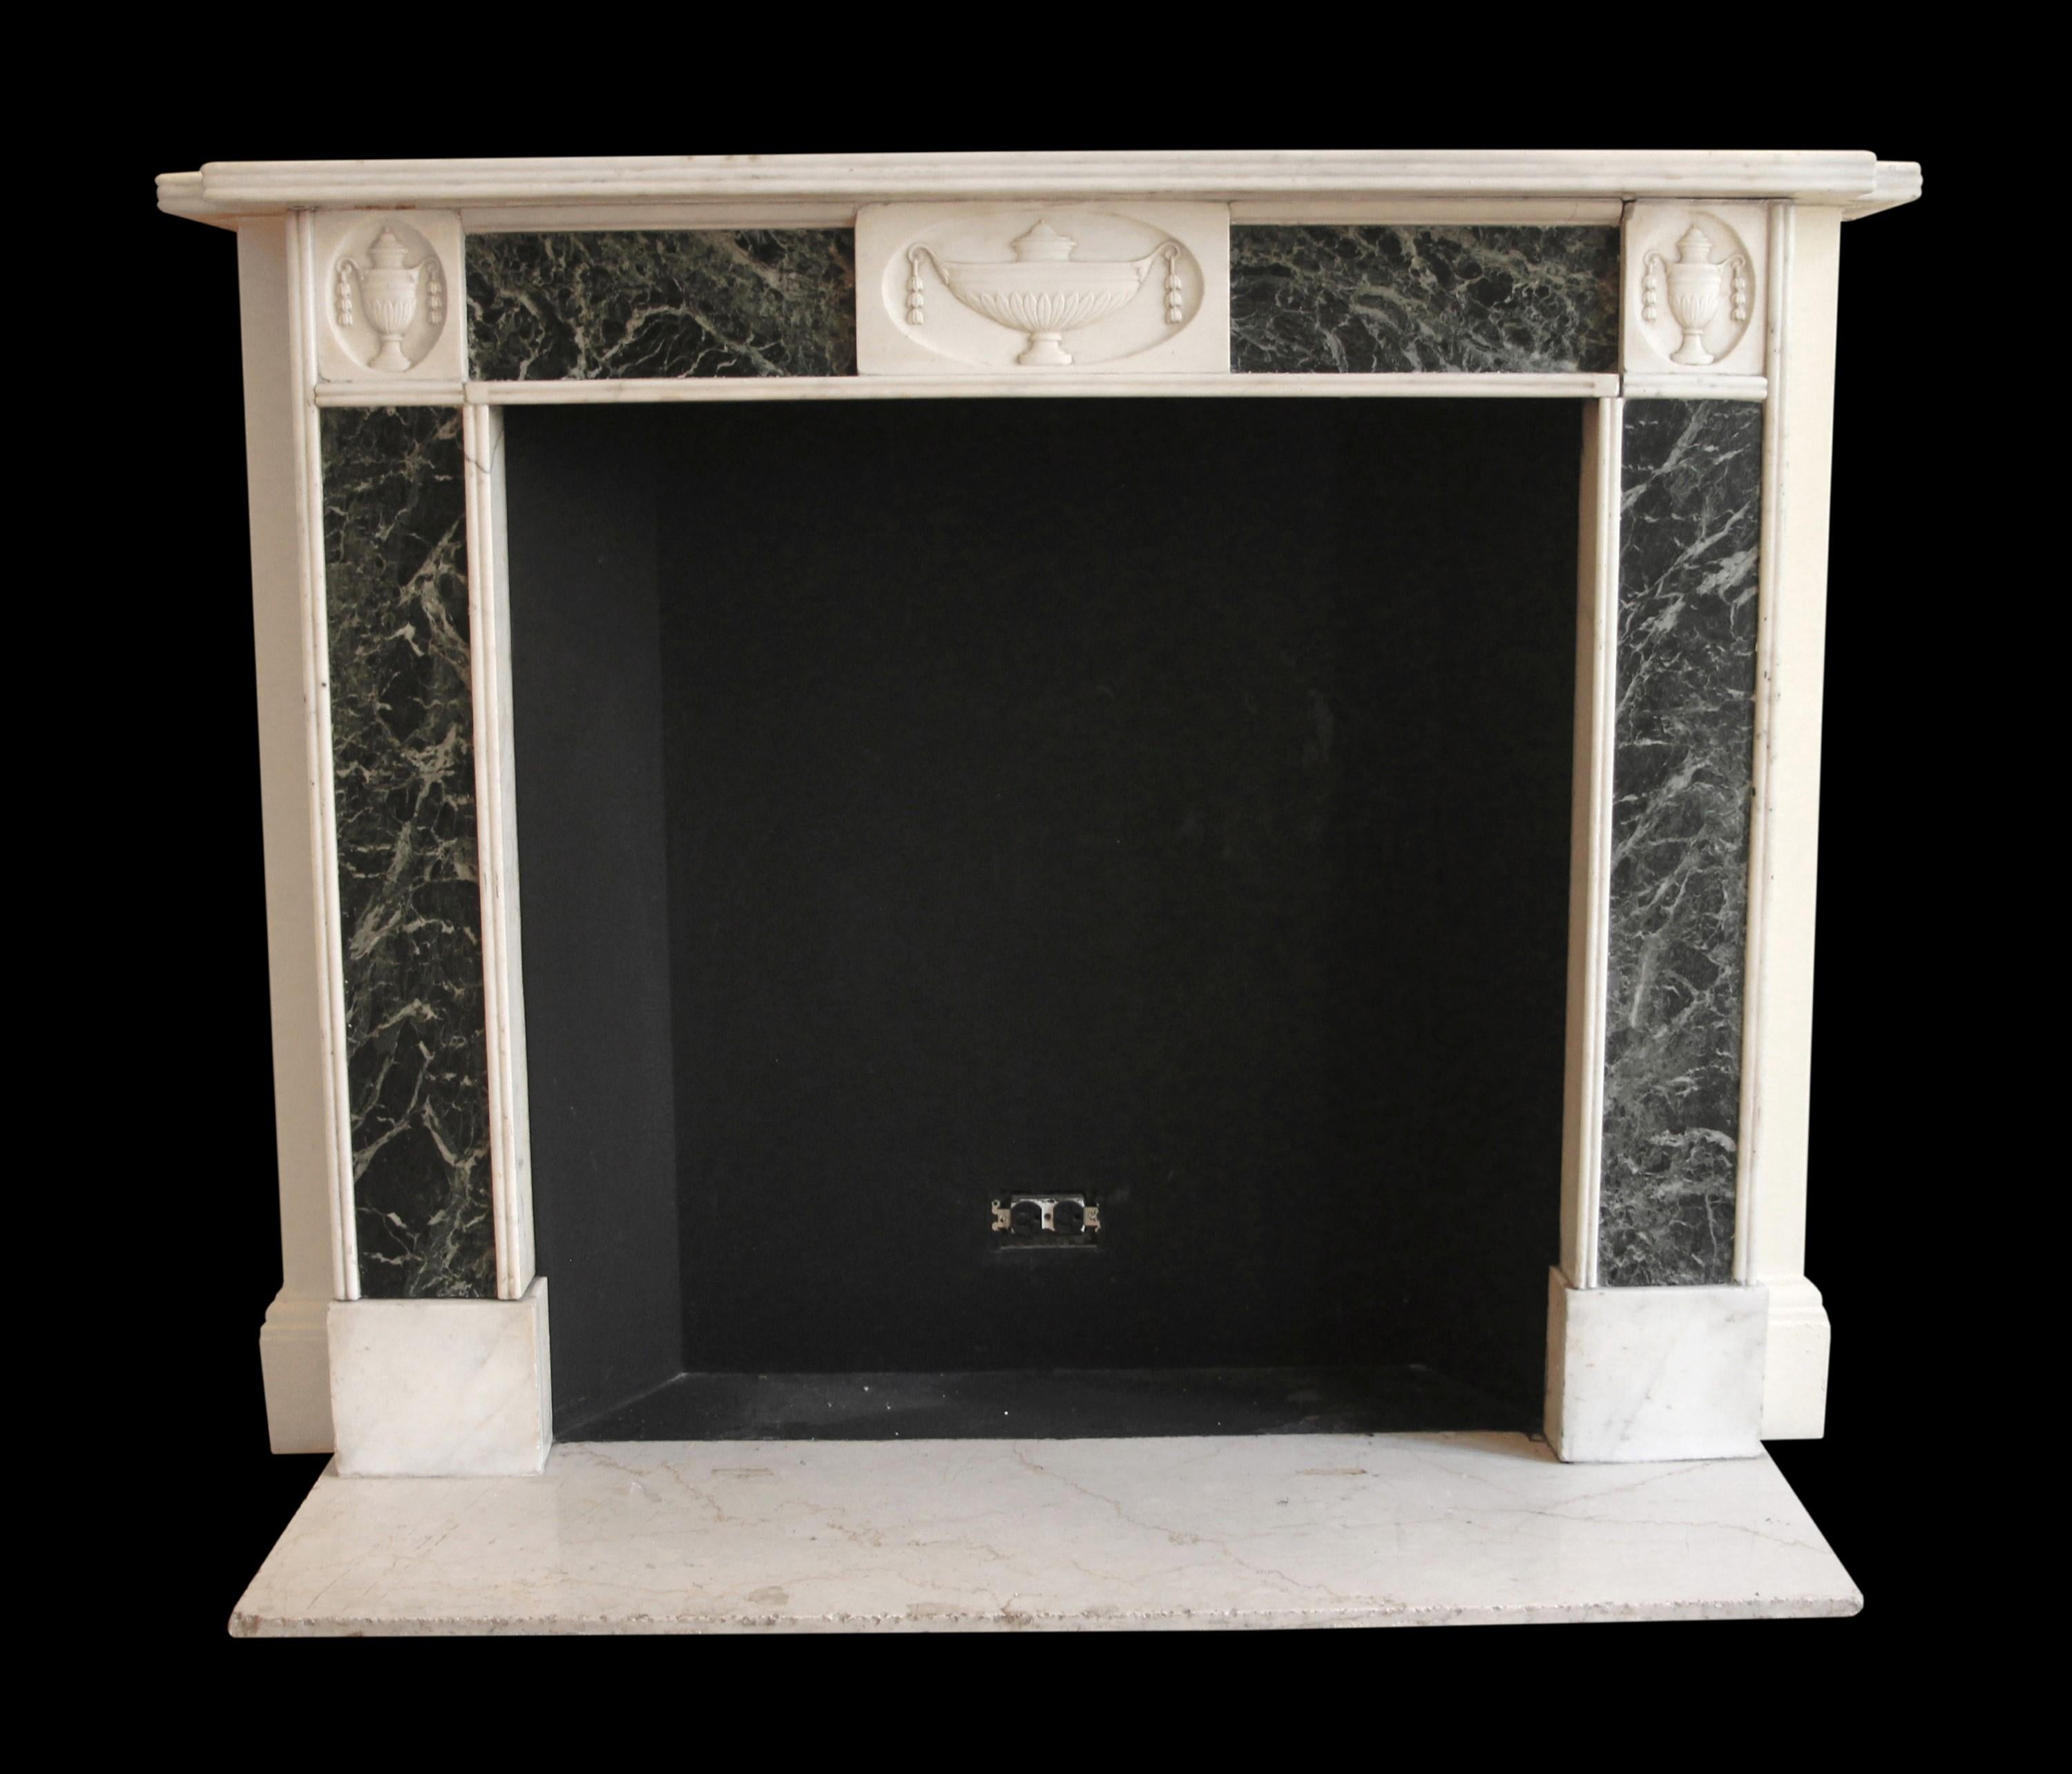 Early 20th century Neoclassical style Verde Antico green and white marble mantel featuring three hand carved urn motifs in the top two corners and center. This antique mantel was brought over from Europe to furnish the newly built Waldorf Astoria